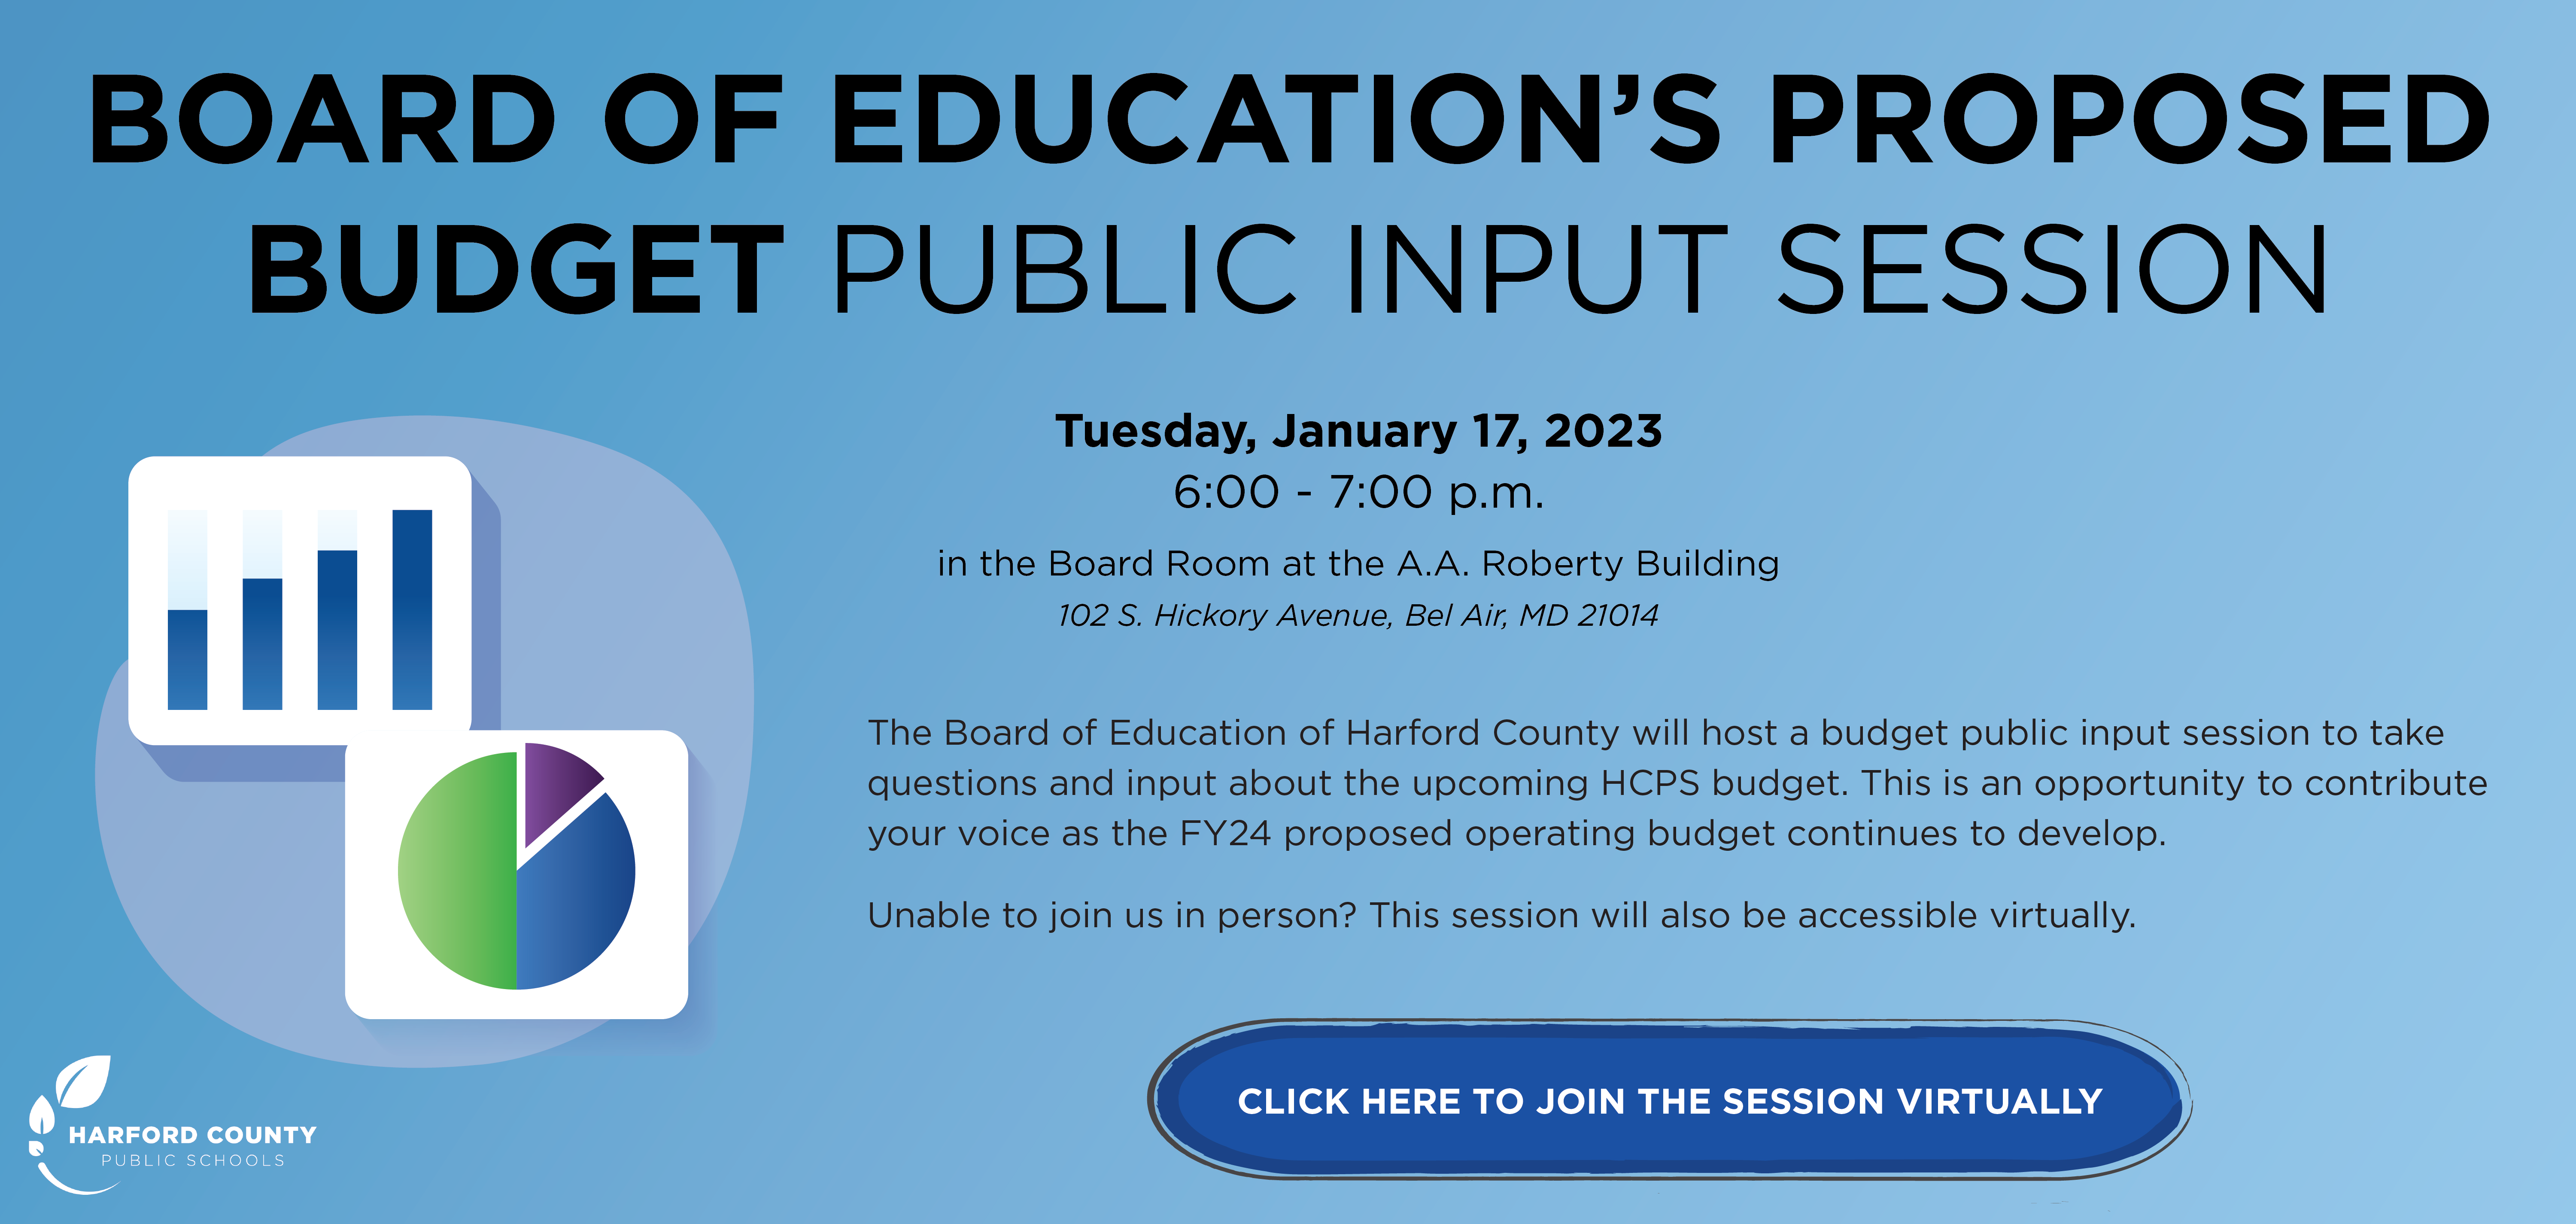 Board of Educations Proposed Budget Public Input Session - Tuesday, January 17, 2023 6:00 - 7:00 p.m. in the Board Room at the A.A. Roberty Building - 102 S. Hickory Avenue, Bel Air, MD 21014.  The Board of Education of Harford County will host a budget public input session to take questions and input about the upcoming HCPS budget.  This is an opportunity to contribute your voice as the FY24 proposed operating budget continues to develop.  Unable to join us in person? This session will also be accessible virtually.  Individuals or recognized groups wishing to speak on the topic of 'Budget' mat request to do so by sending an email to publiccomment@hcps.org or calling 310-588-5347 by no later than 12:00 p.m. on Tuesday January 17.